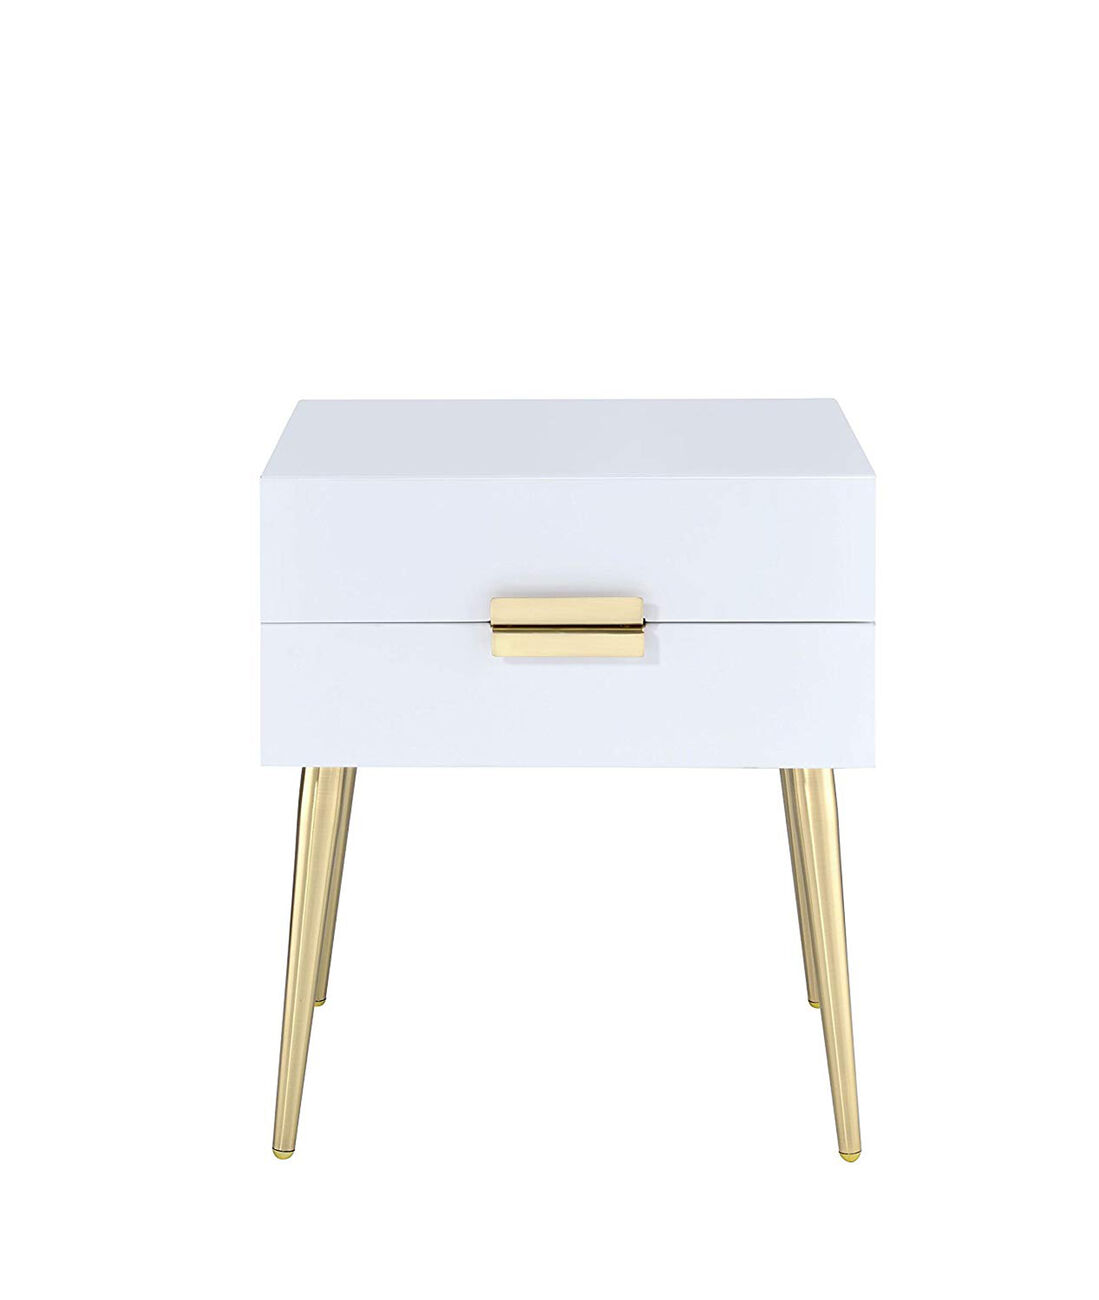 Denvor Square End Table with Drawers, White & Gold